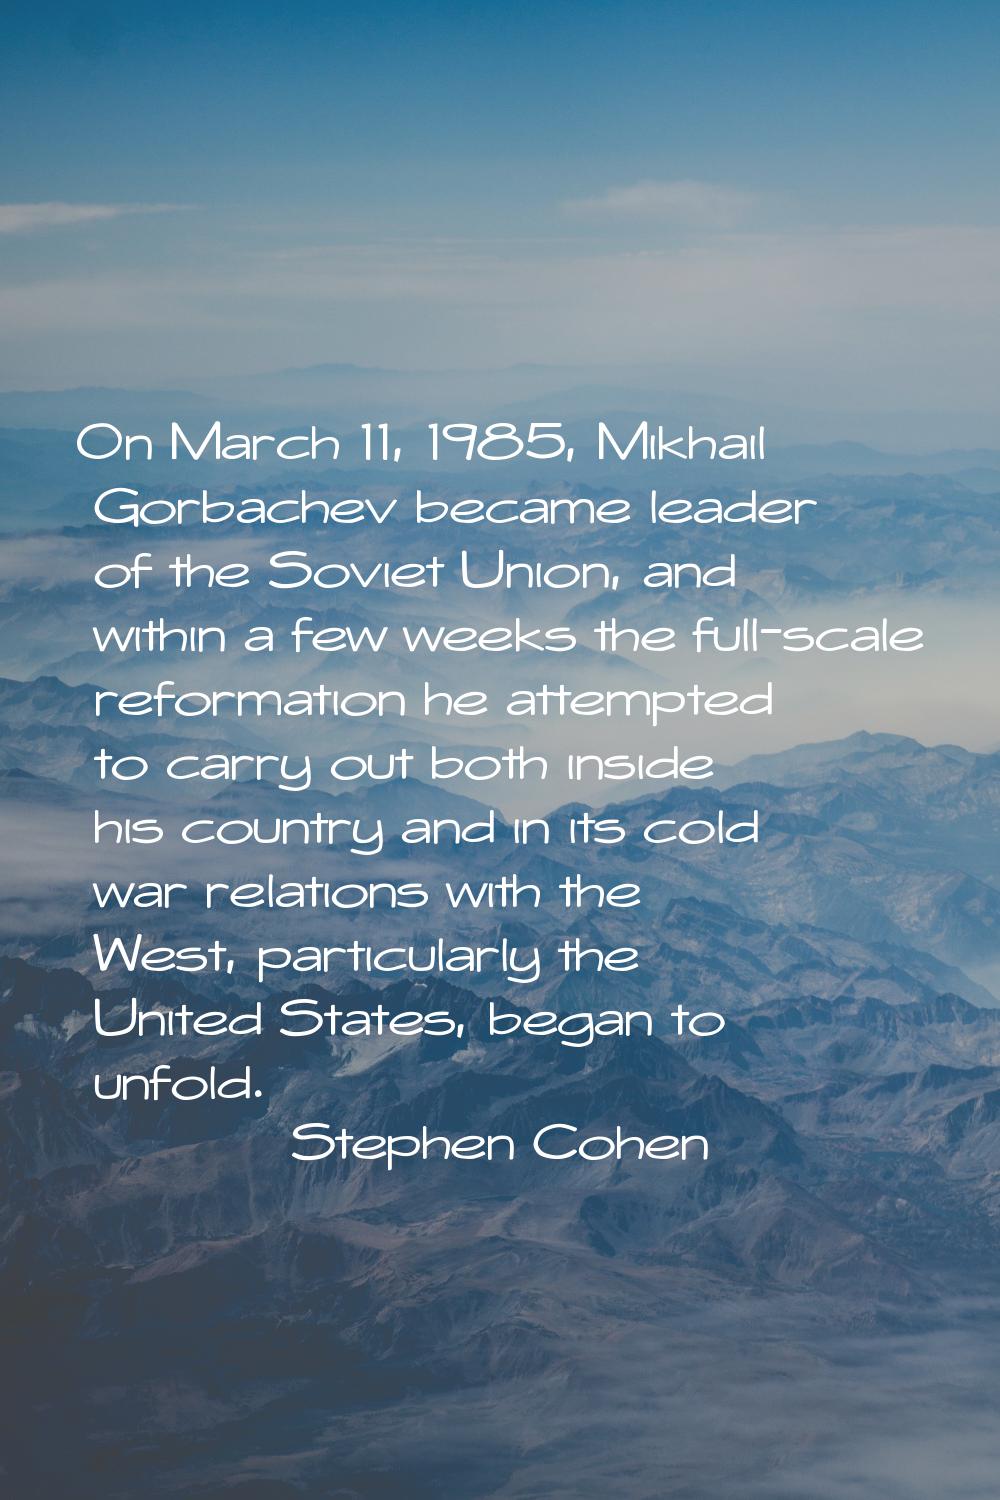 On March 11, 1985, Mikhail Gorbachev became leader of the Soviet Union, and within a few weeks the 